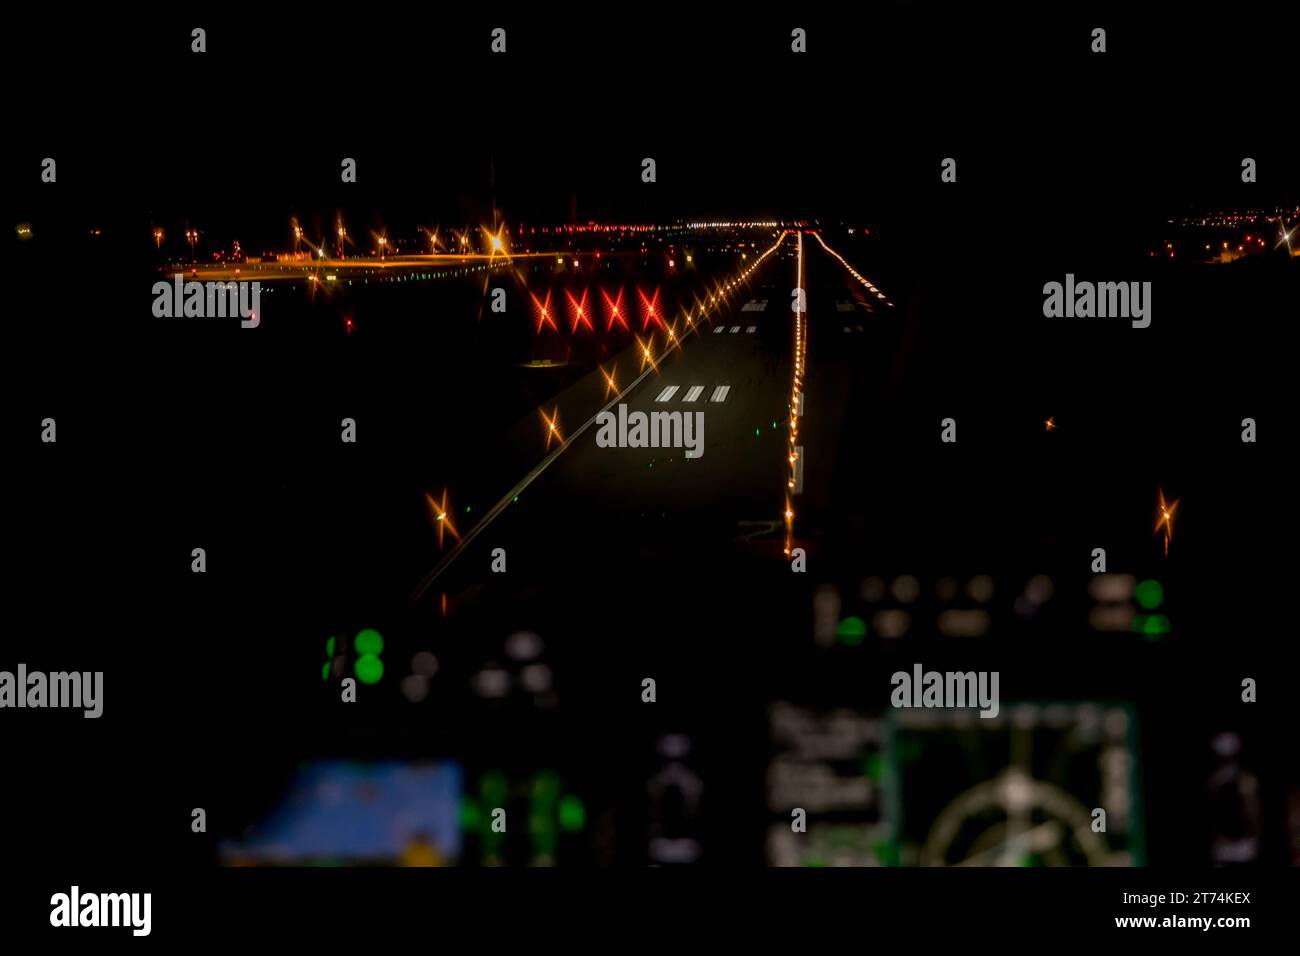 View from the cockpit of a modern airplane landing at an illuminated airport at night. Illuminated glass cockpit dashboard while landing at an airport Stock Photo